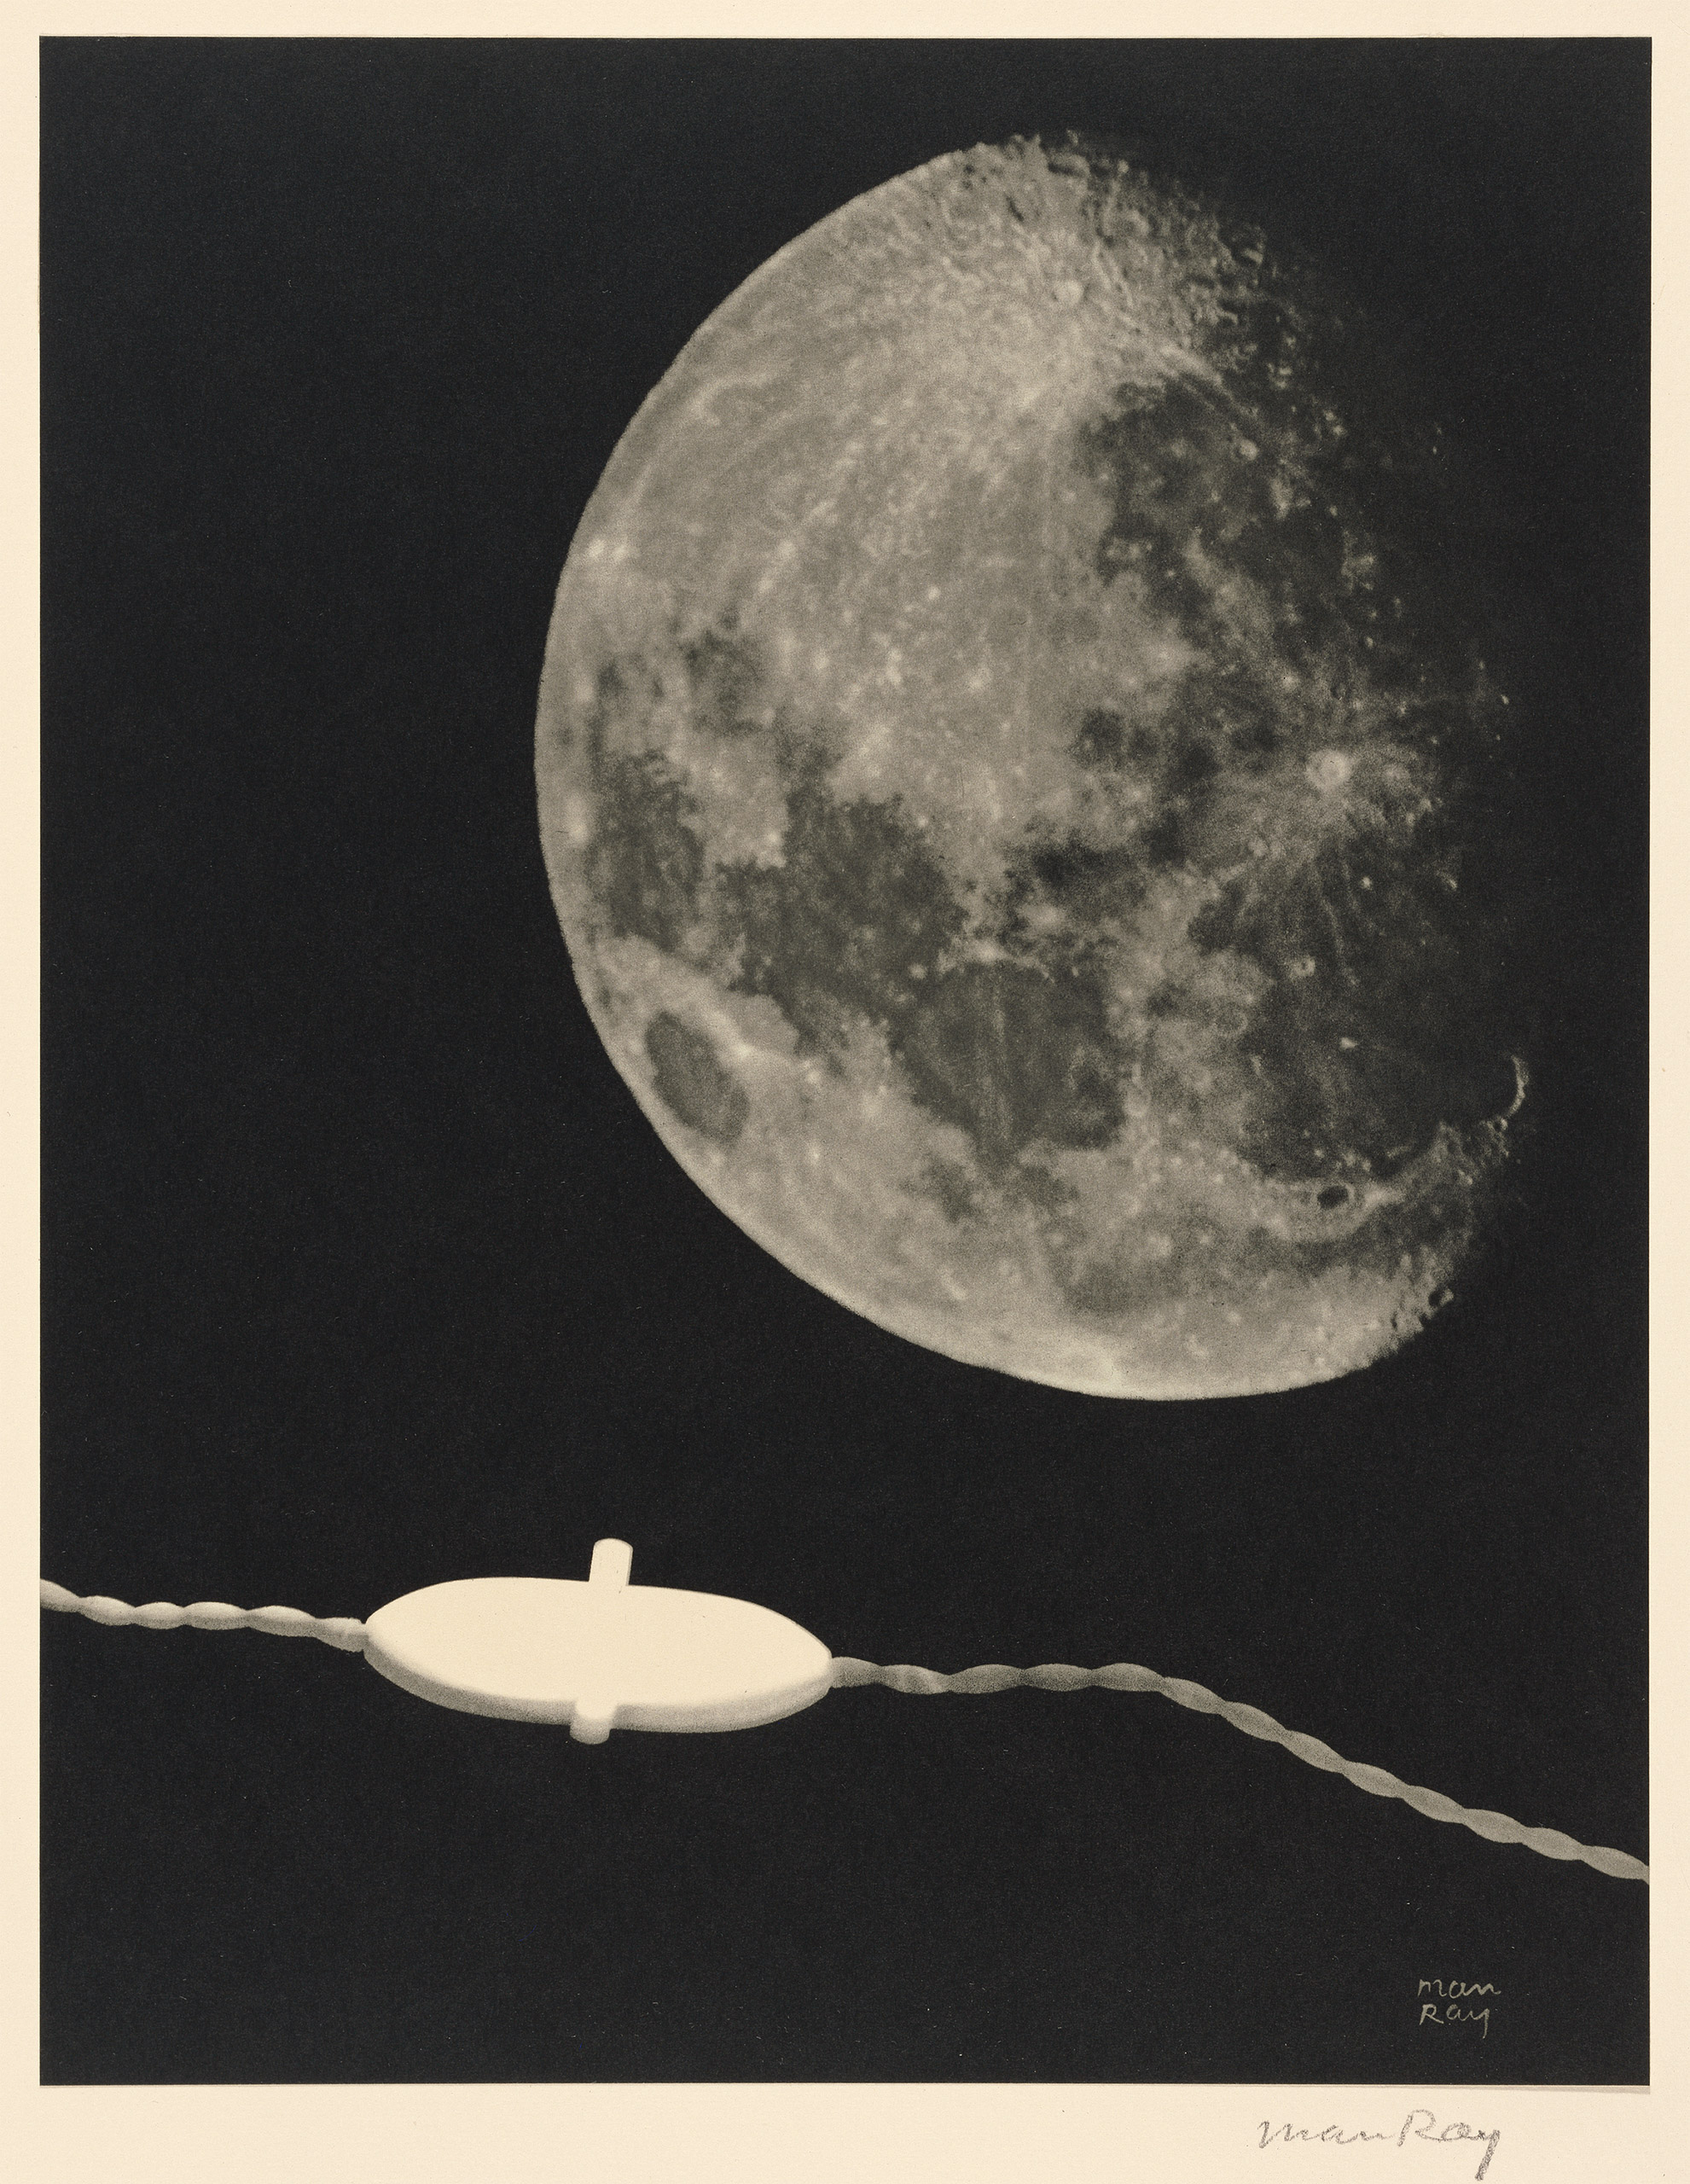 Electricity - The World [Electricite - Le Monde], 1931Man Ray Trust ARS-ADAGP / The J. Paul Getty Museum, Los Angeles